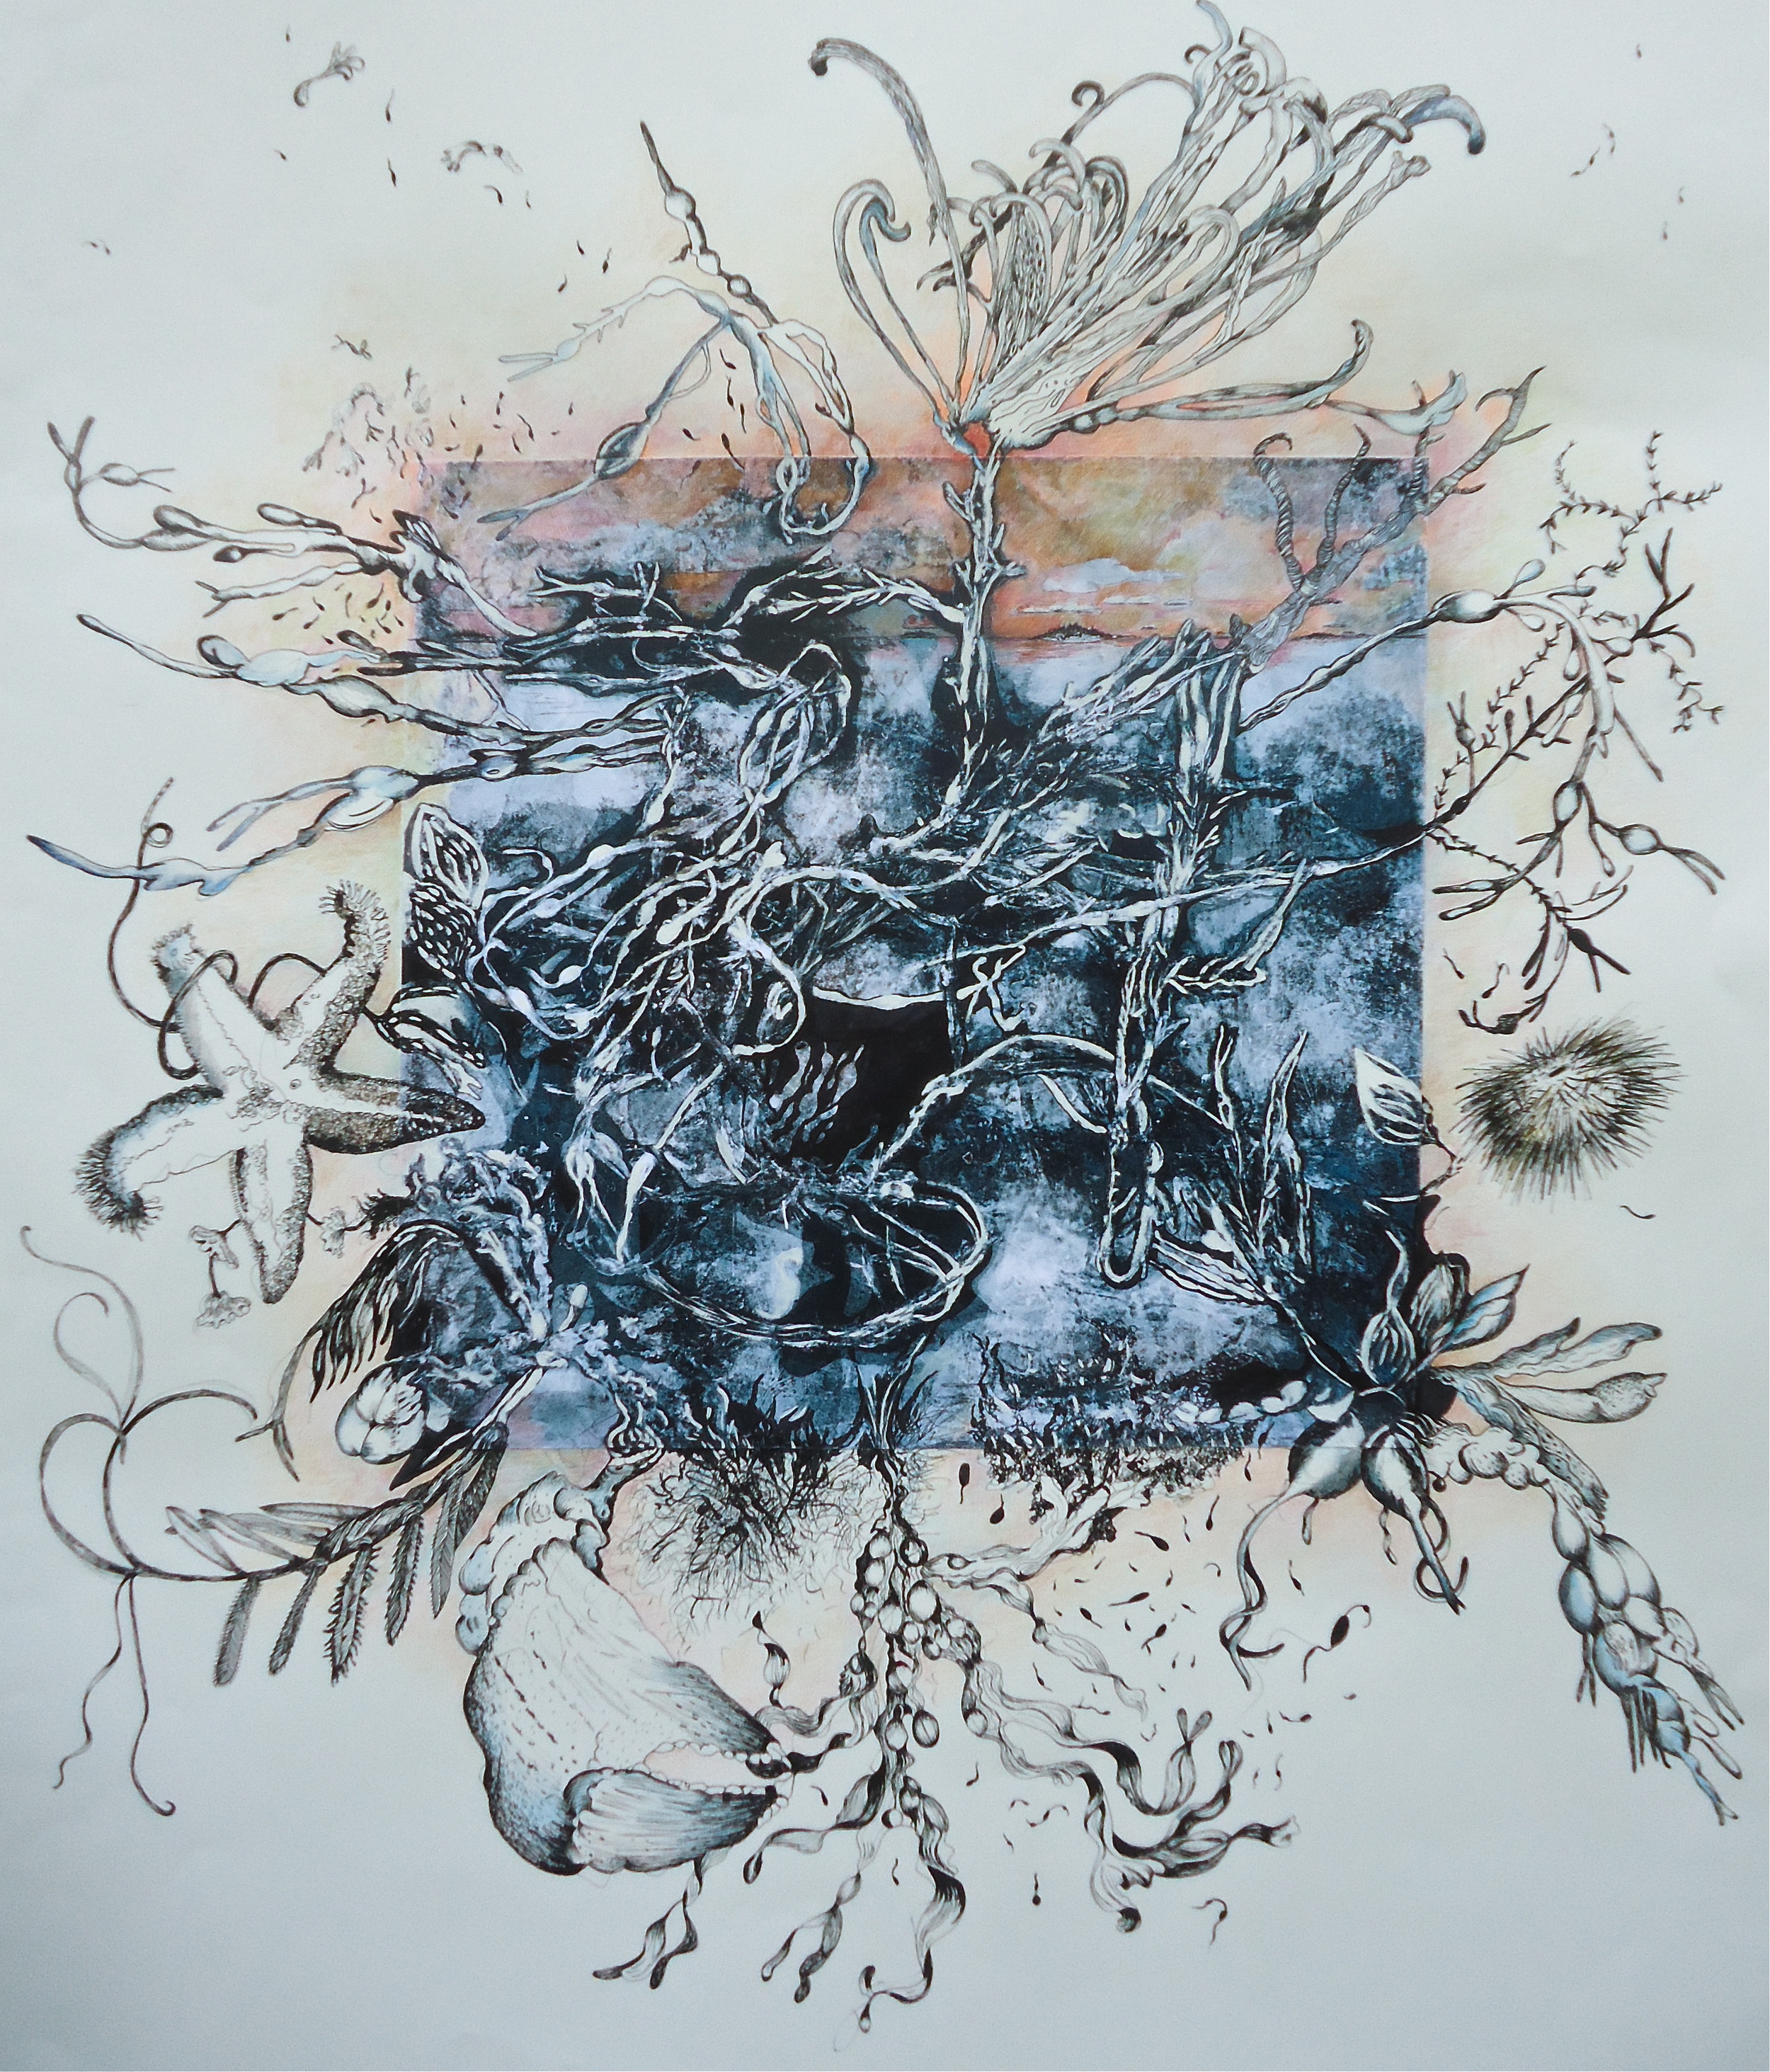   Tidal Landscape   35&nbsp;x 40 inches  monotype, drawing, painting  2014 